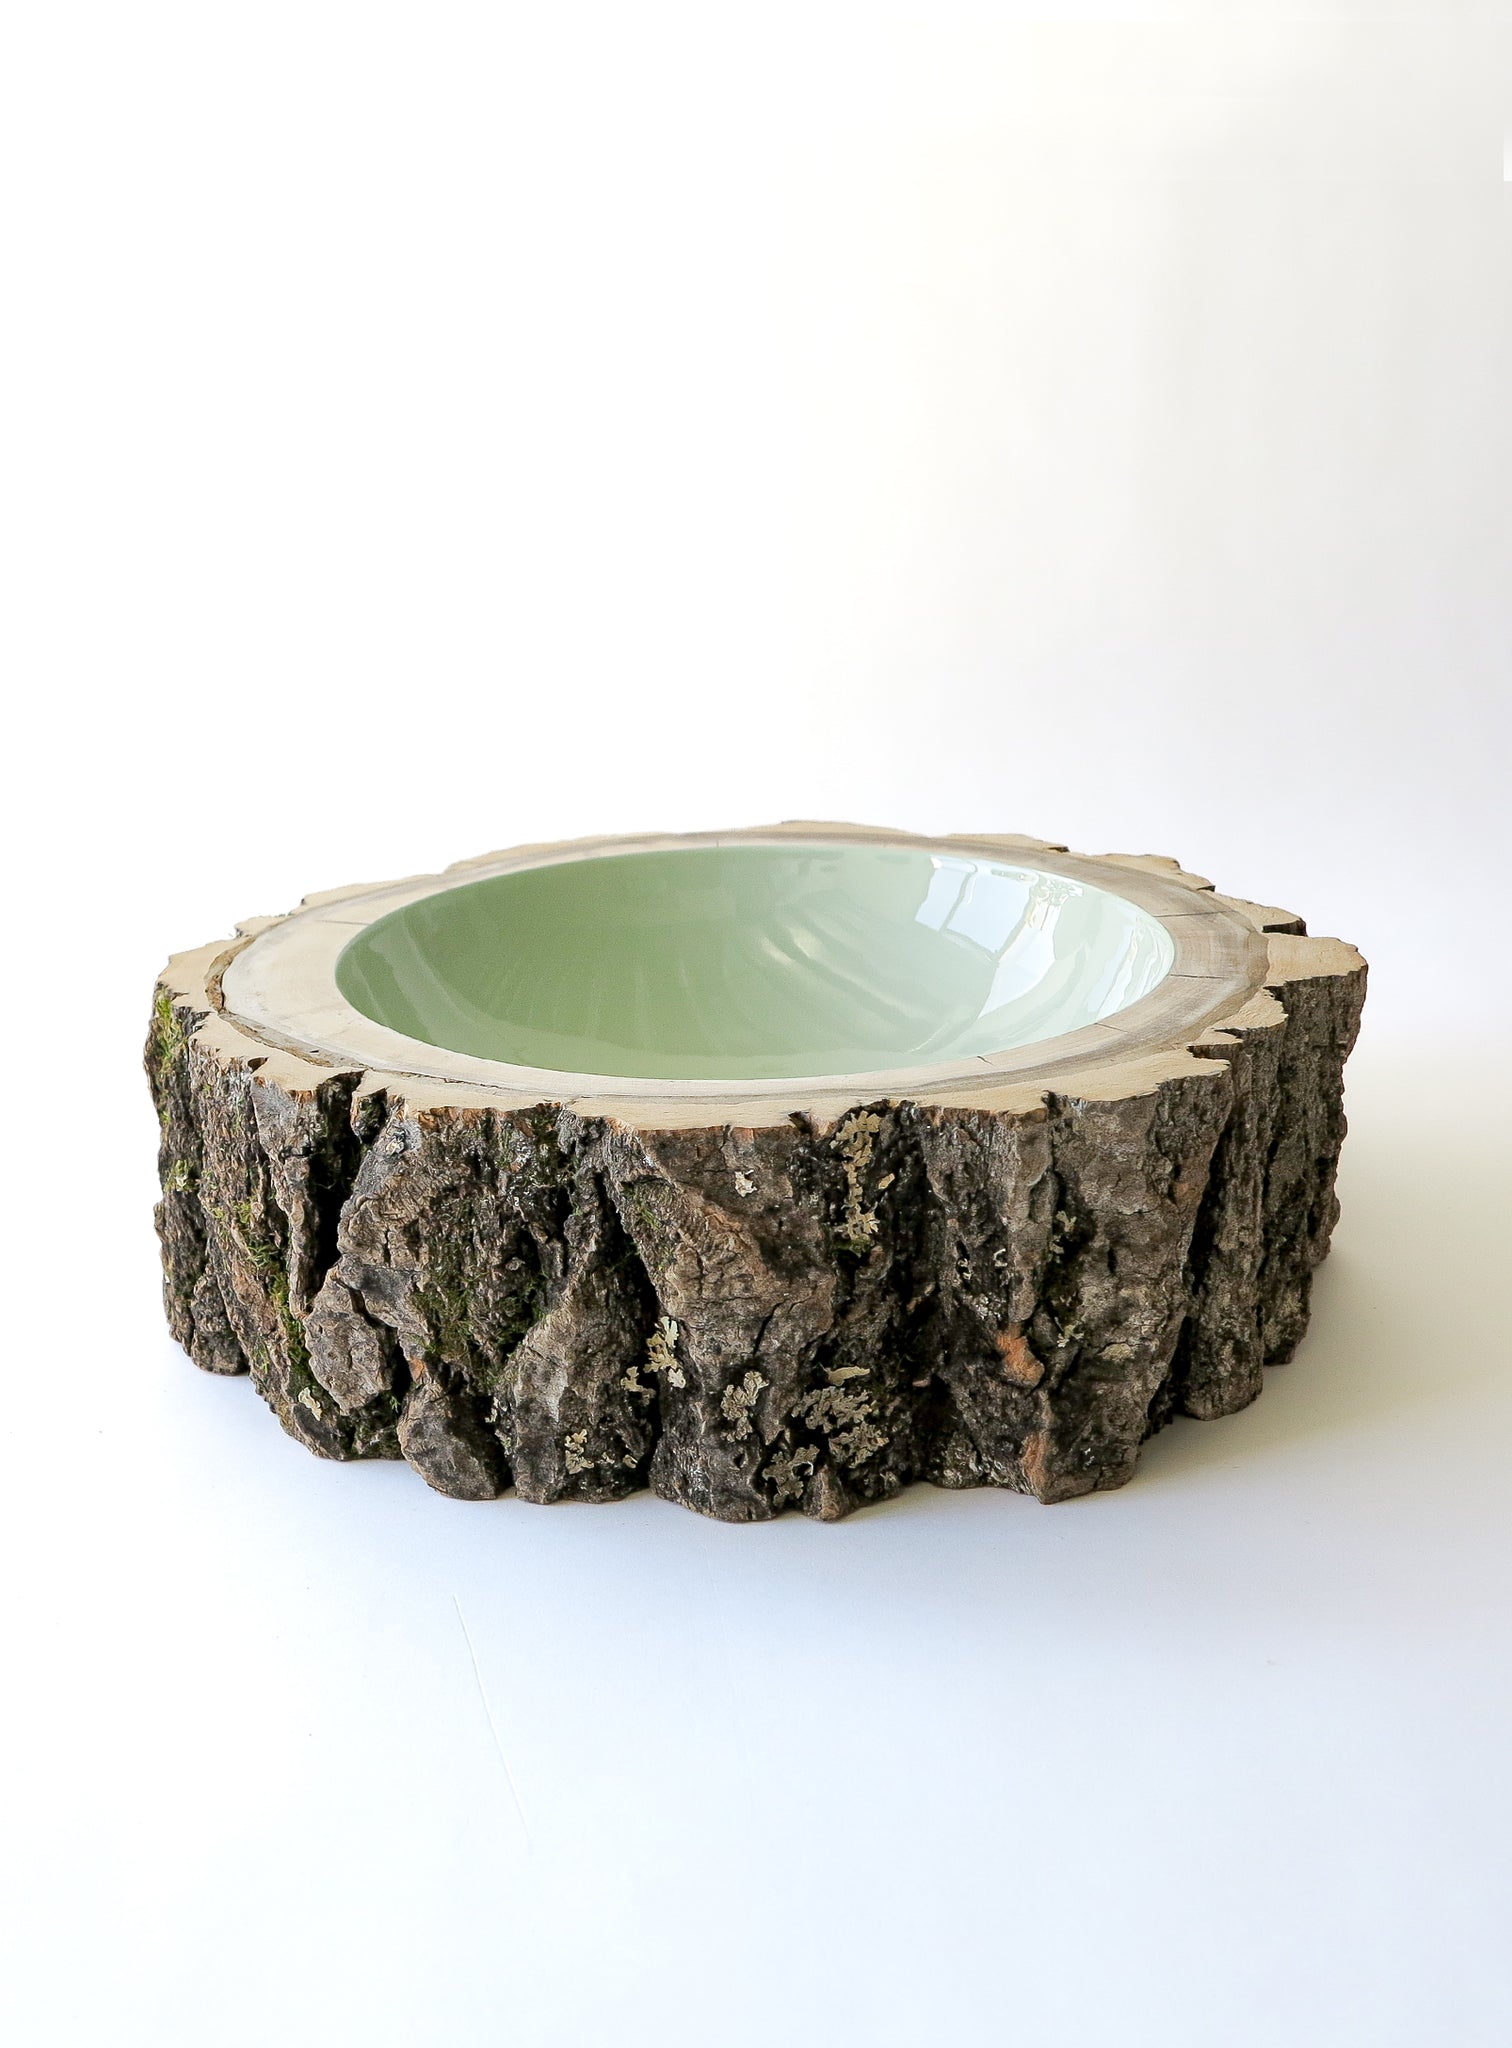 3/4 front view of Size 11 Eucalyptus Log Bowl by Loyal Loot - Large Wooden Bowl with rough Willow bark, glossy interior is a light serene green colour.